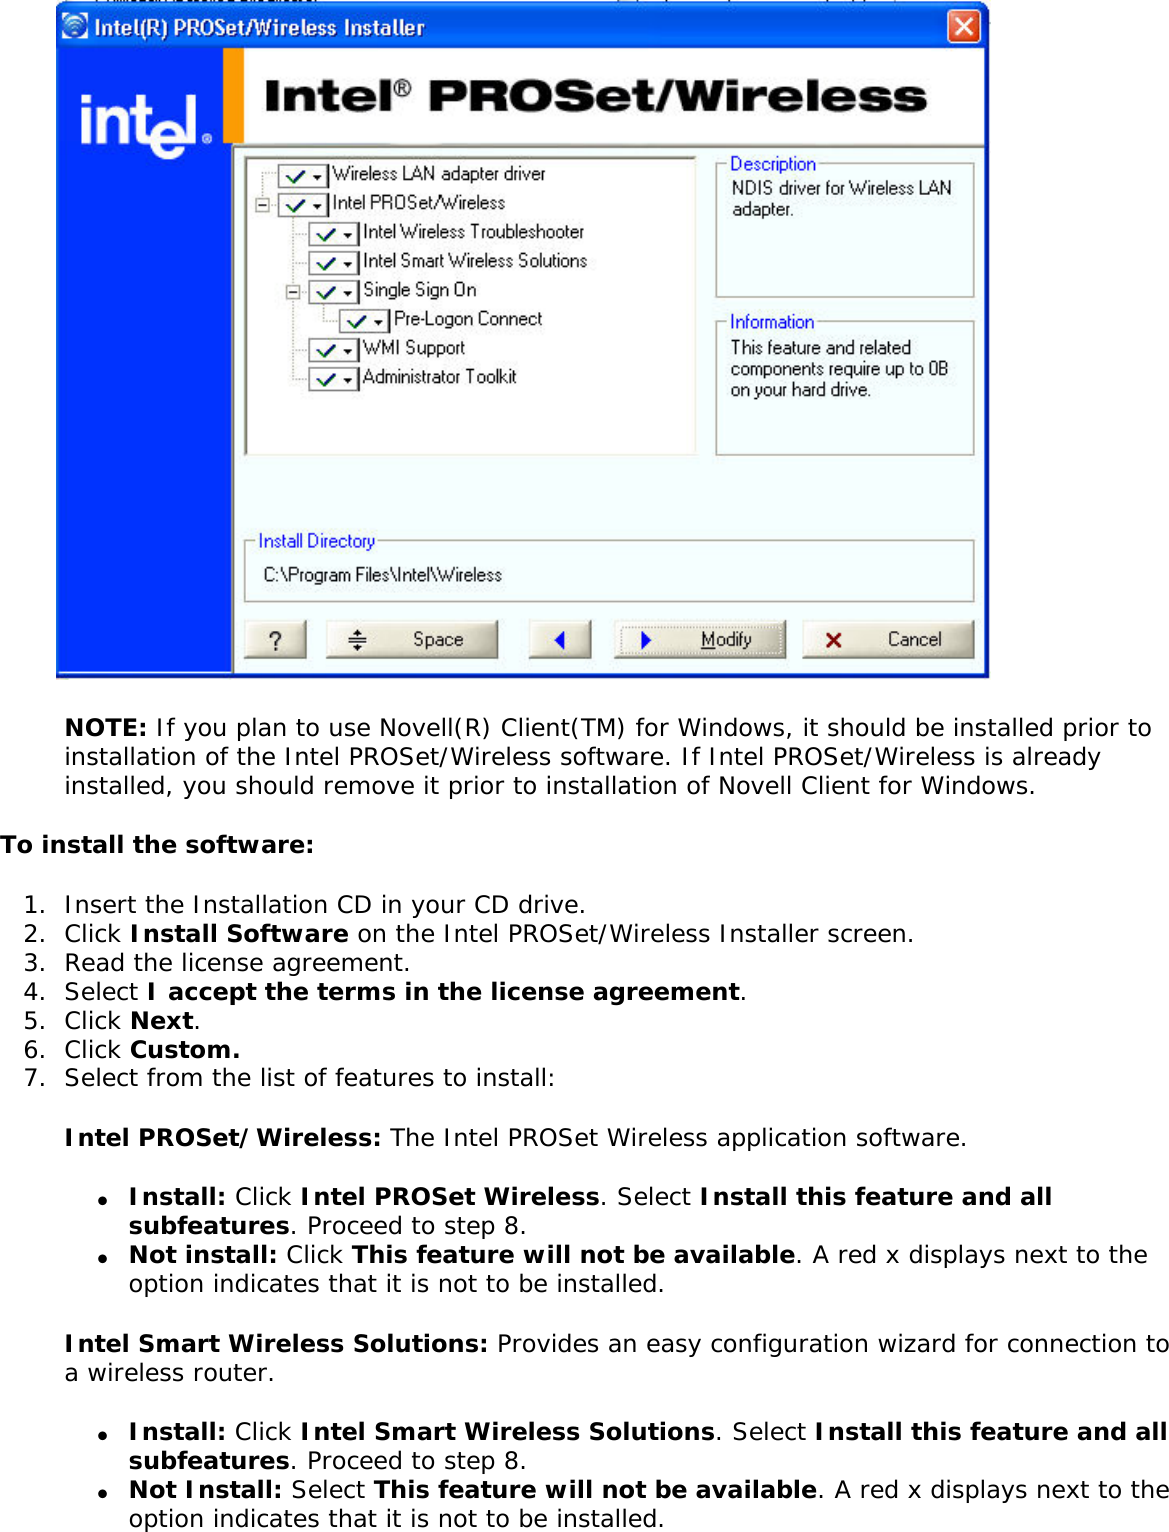  NOTE: If you plan to use Novell(R) Client(TM) for Windows, it should be installed prior to installation of the Intel PROSet/Wireless software. If Intel PROSet/Wireless is already installed, you should remove it prior to installation of Novell Client for Windows. To install the software:1.  Insert the Installation CD in your CD drive. 2.  Click Install Software on the Intel PROSet/Wireless Installer screen.3.  Read the license agreement. 4.  Select I accept the terms in the license agreement.5.  Click Next.6.  Click Custom.7.  Select from the list of features to install:Intel PROSet/Wireless: The Intel PROSet Wireless application software. ●     Install: Click Intel PROSet Wireless. Select Install this feature and all subfeatures. Proceed to step 8. ●     Not install: Click This feature will not be available. A red x displays next to the option indicates that it is not to be installed.Intel Smart Wireless Solutions: Provides an easy configuration wizard for connection to a wireless router. ●     Install: Click Intel Smart Wireless Solutions. Select Install this feature and all subfeatures. Proceed to step 8. ●     Not Install: Select This feature will not be available. A red x displays next to the option indicates that it is not to be installed. 